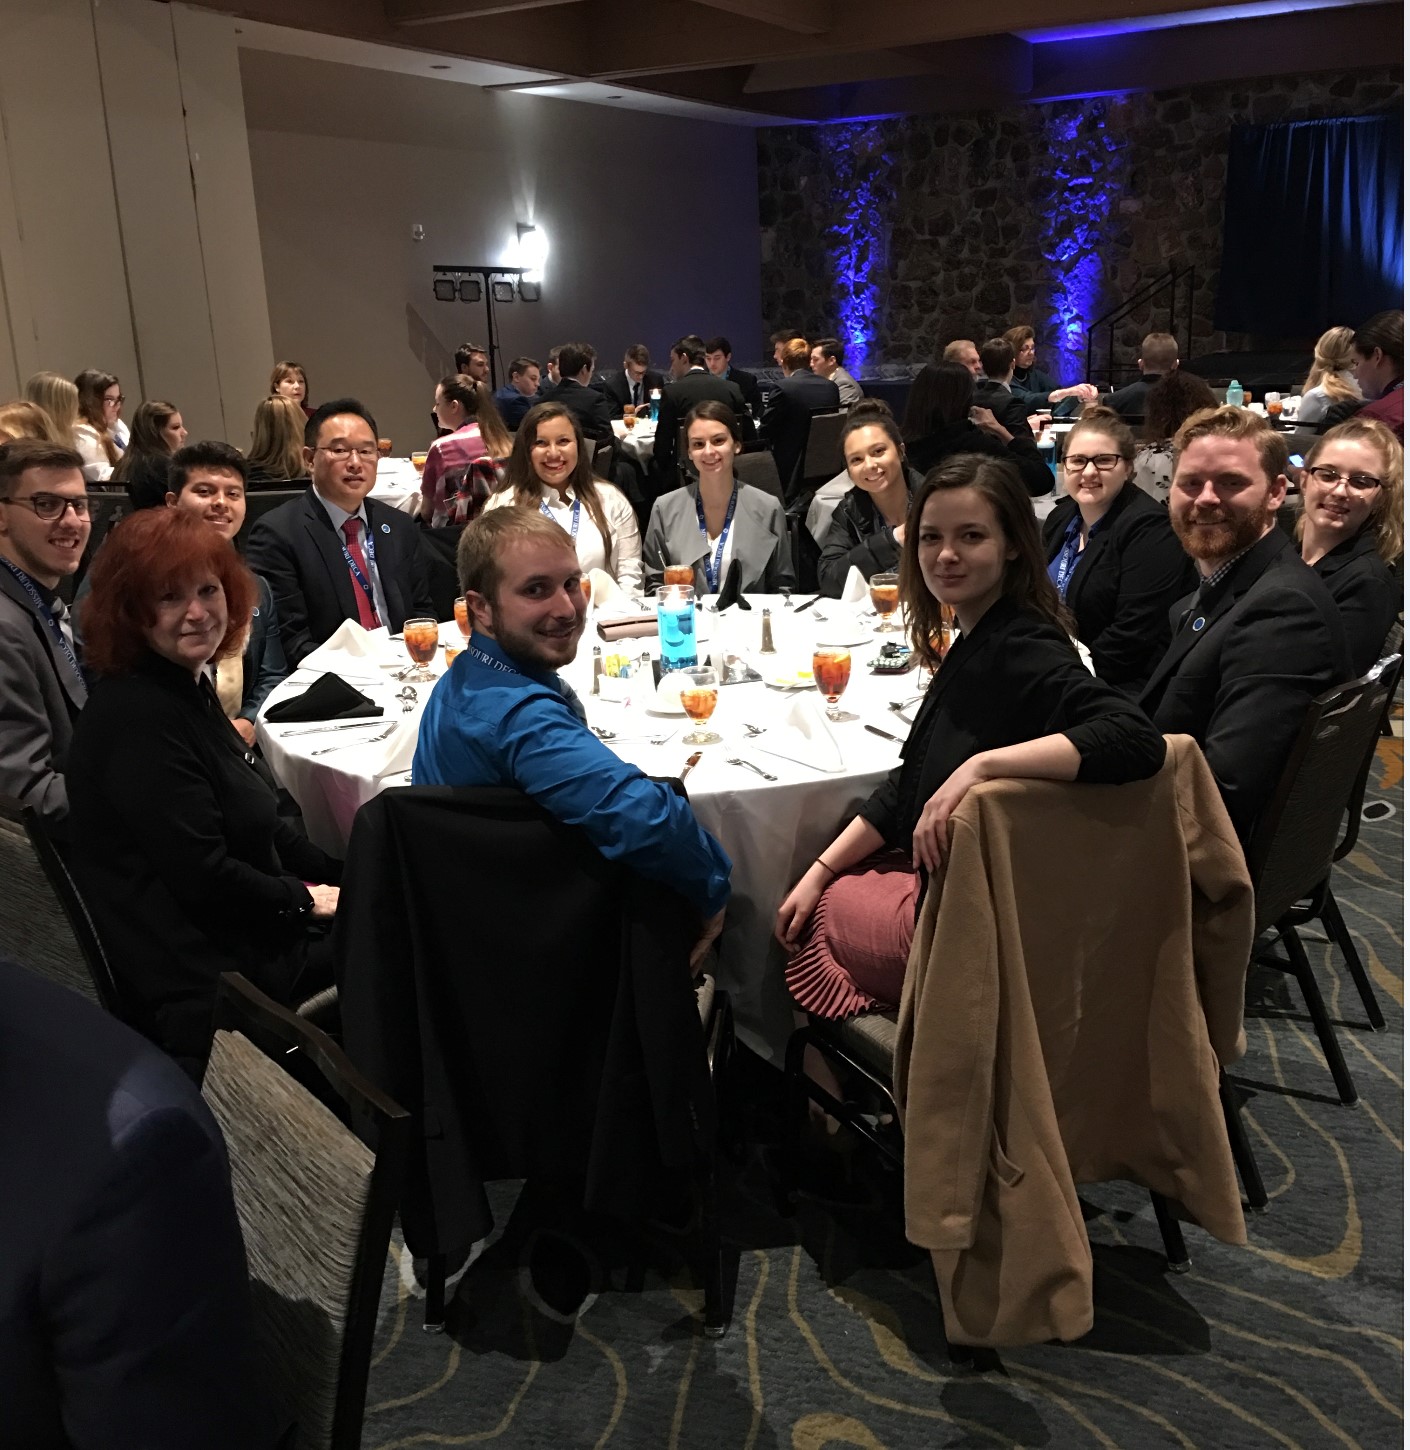 Southeast Marketing Students Claim High Honors at State DECA Competition